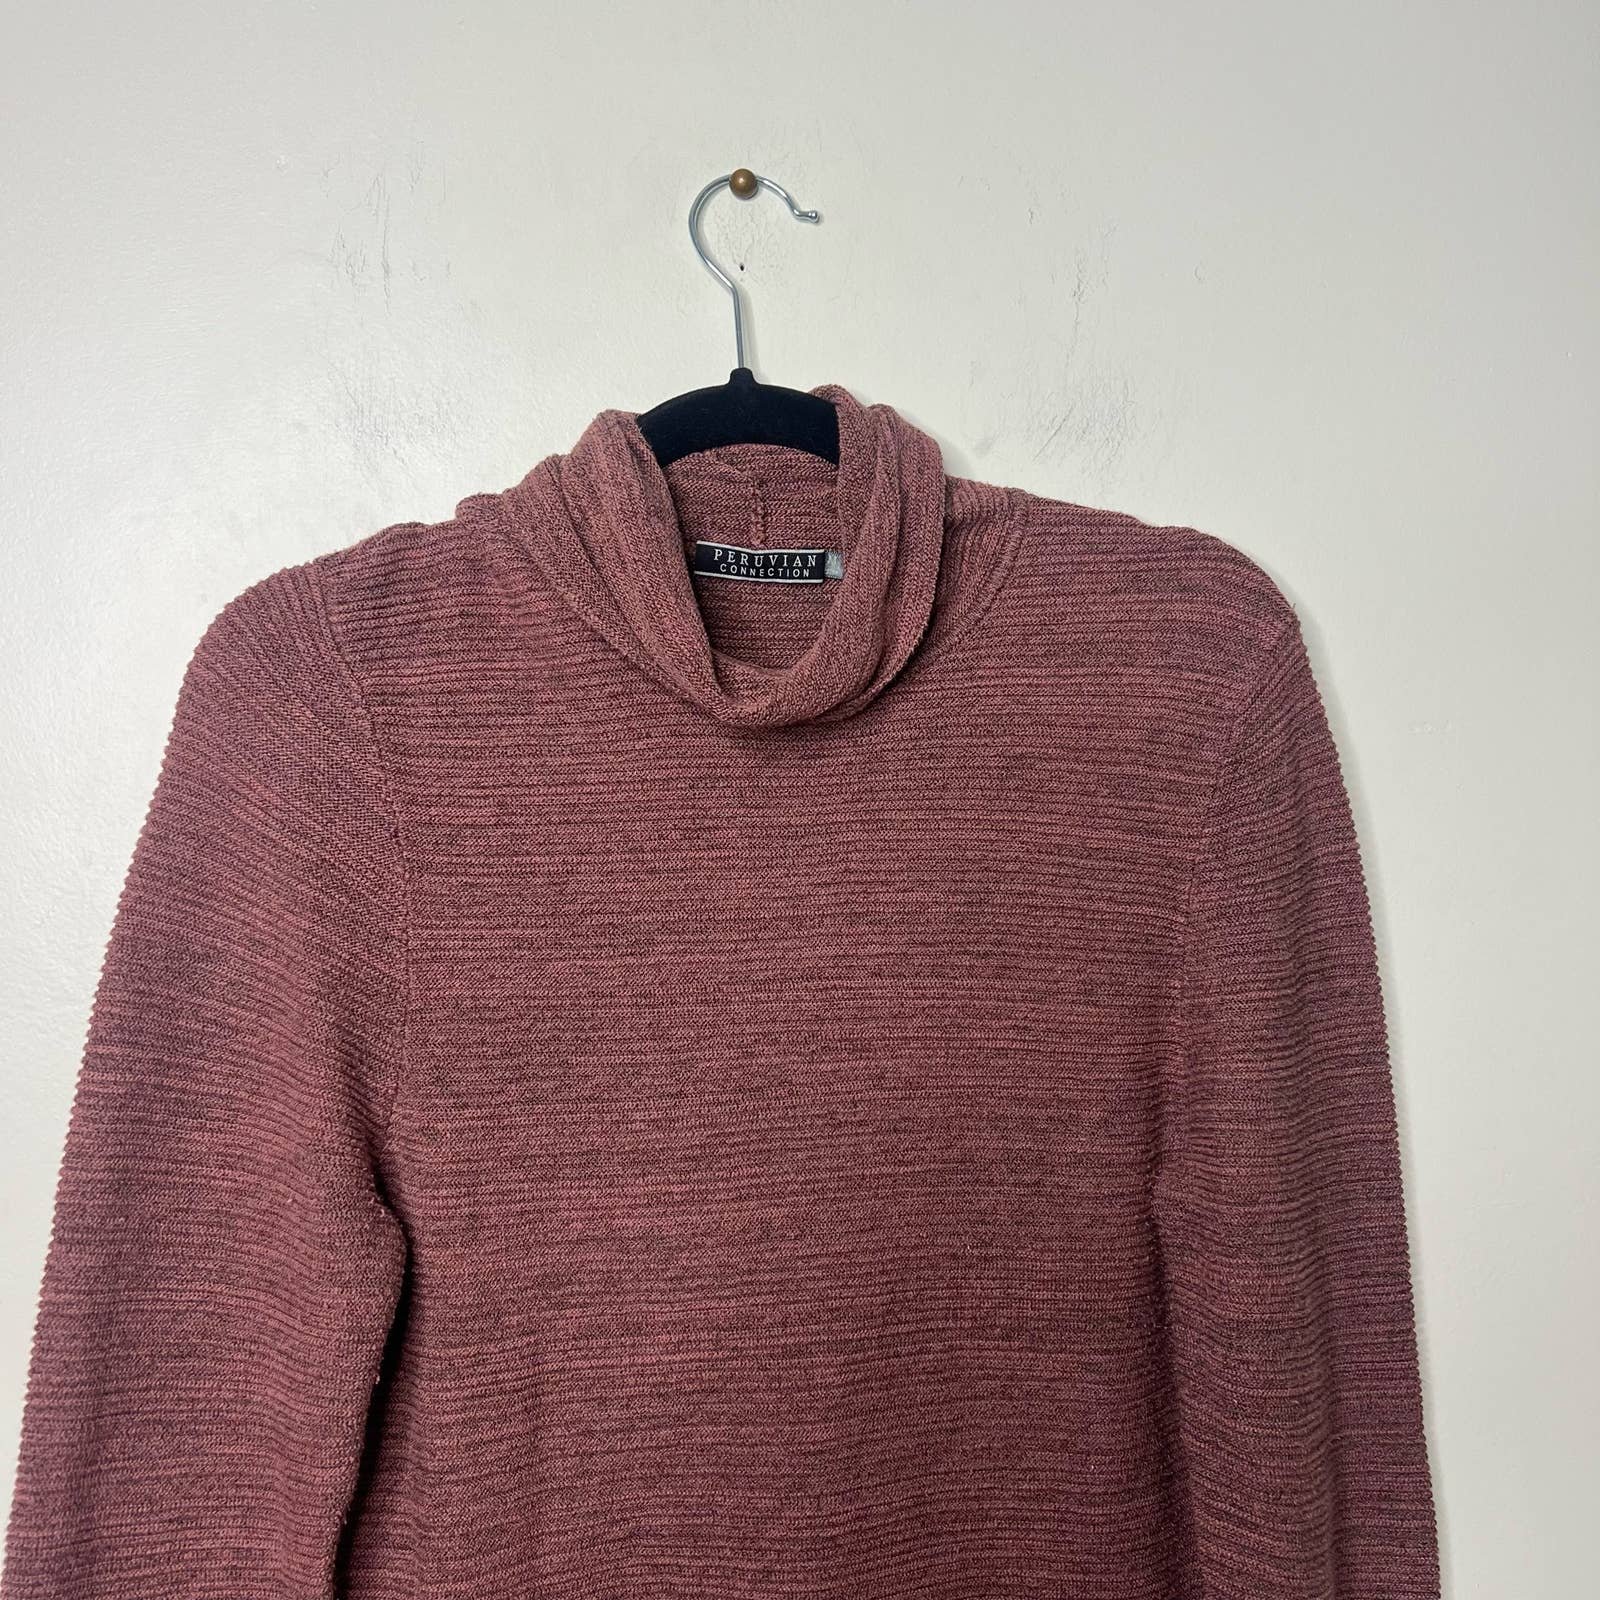 High quality Peruvian Connection Mock Neck Pima Cotton knit Sweater PPPYA5VgG High Quaity